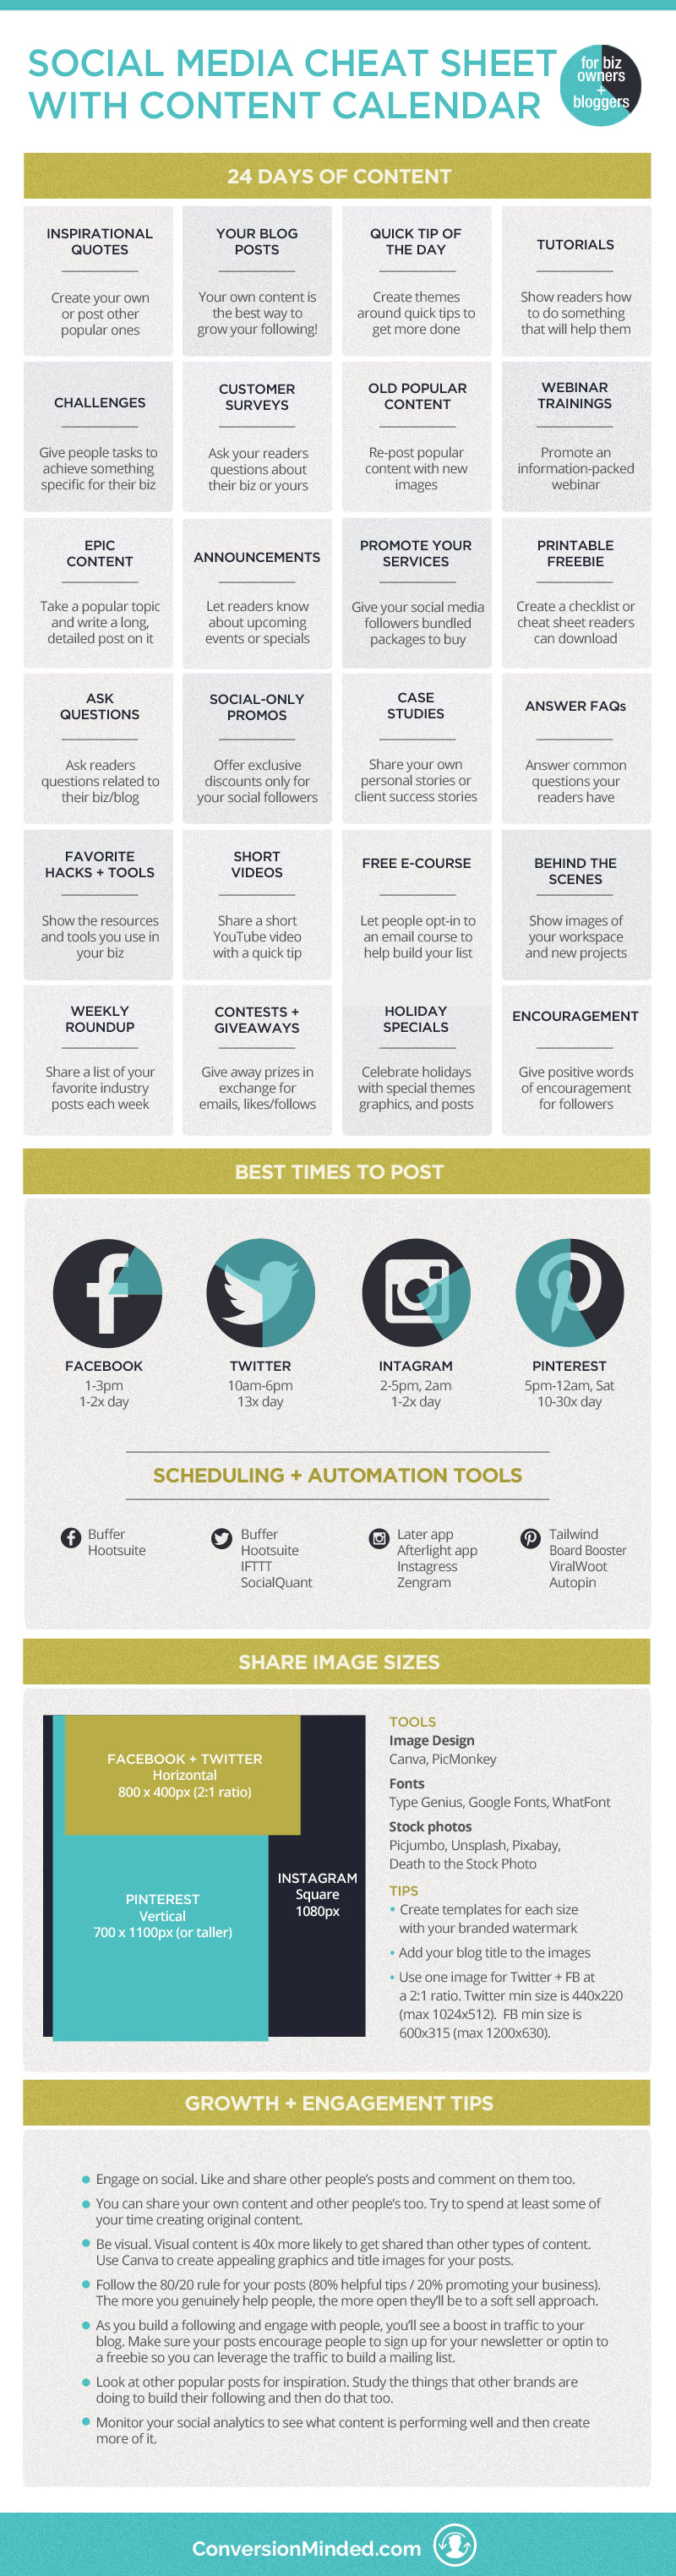 A social media cheat sheet for bloggers and entrepreneurs so you know what to post and when, plus tools to help you automate everything from scheduling, to growth and engagement, and creating images. Click through to see all the tips!